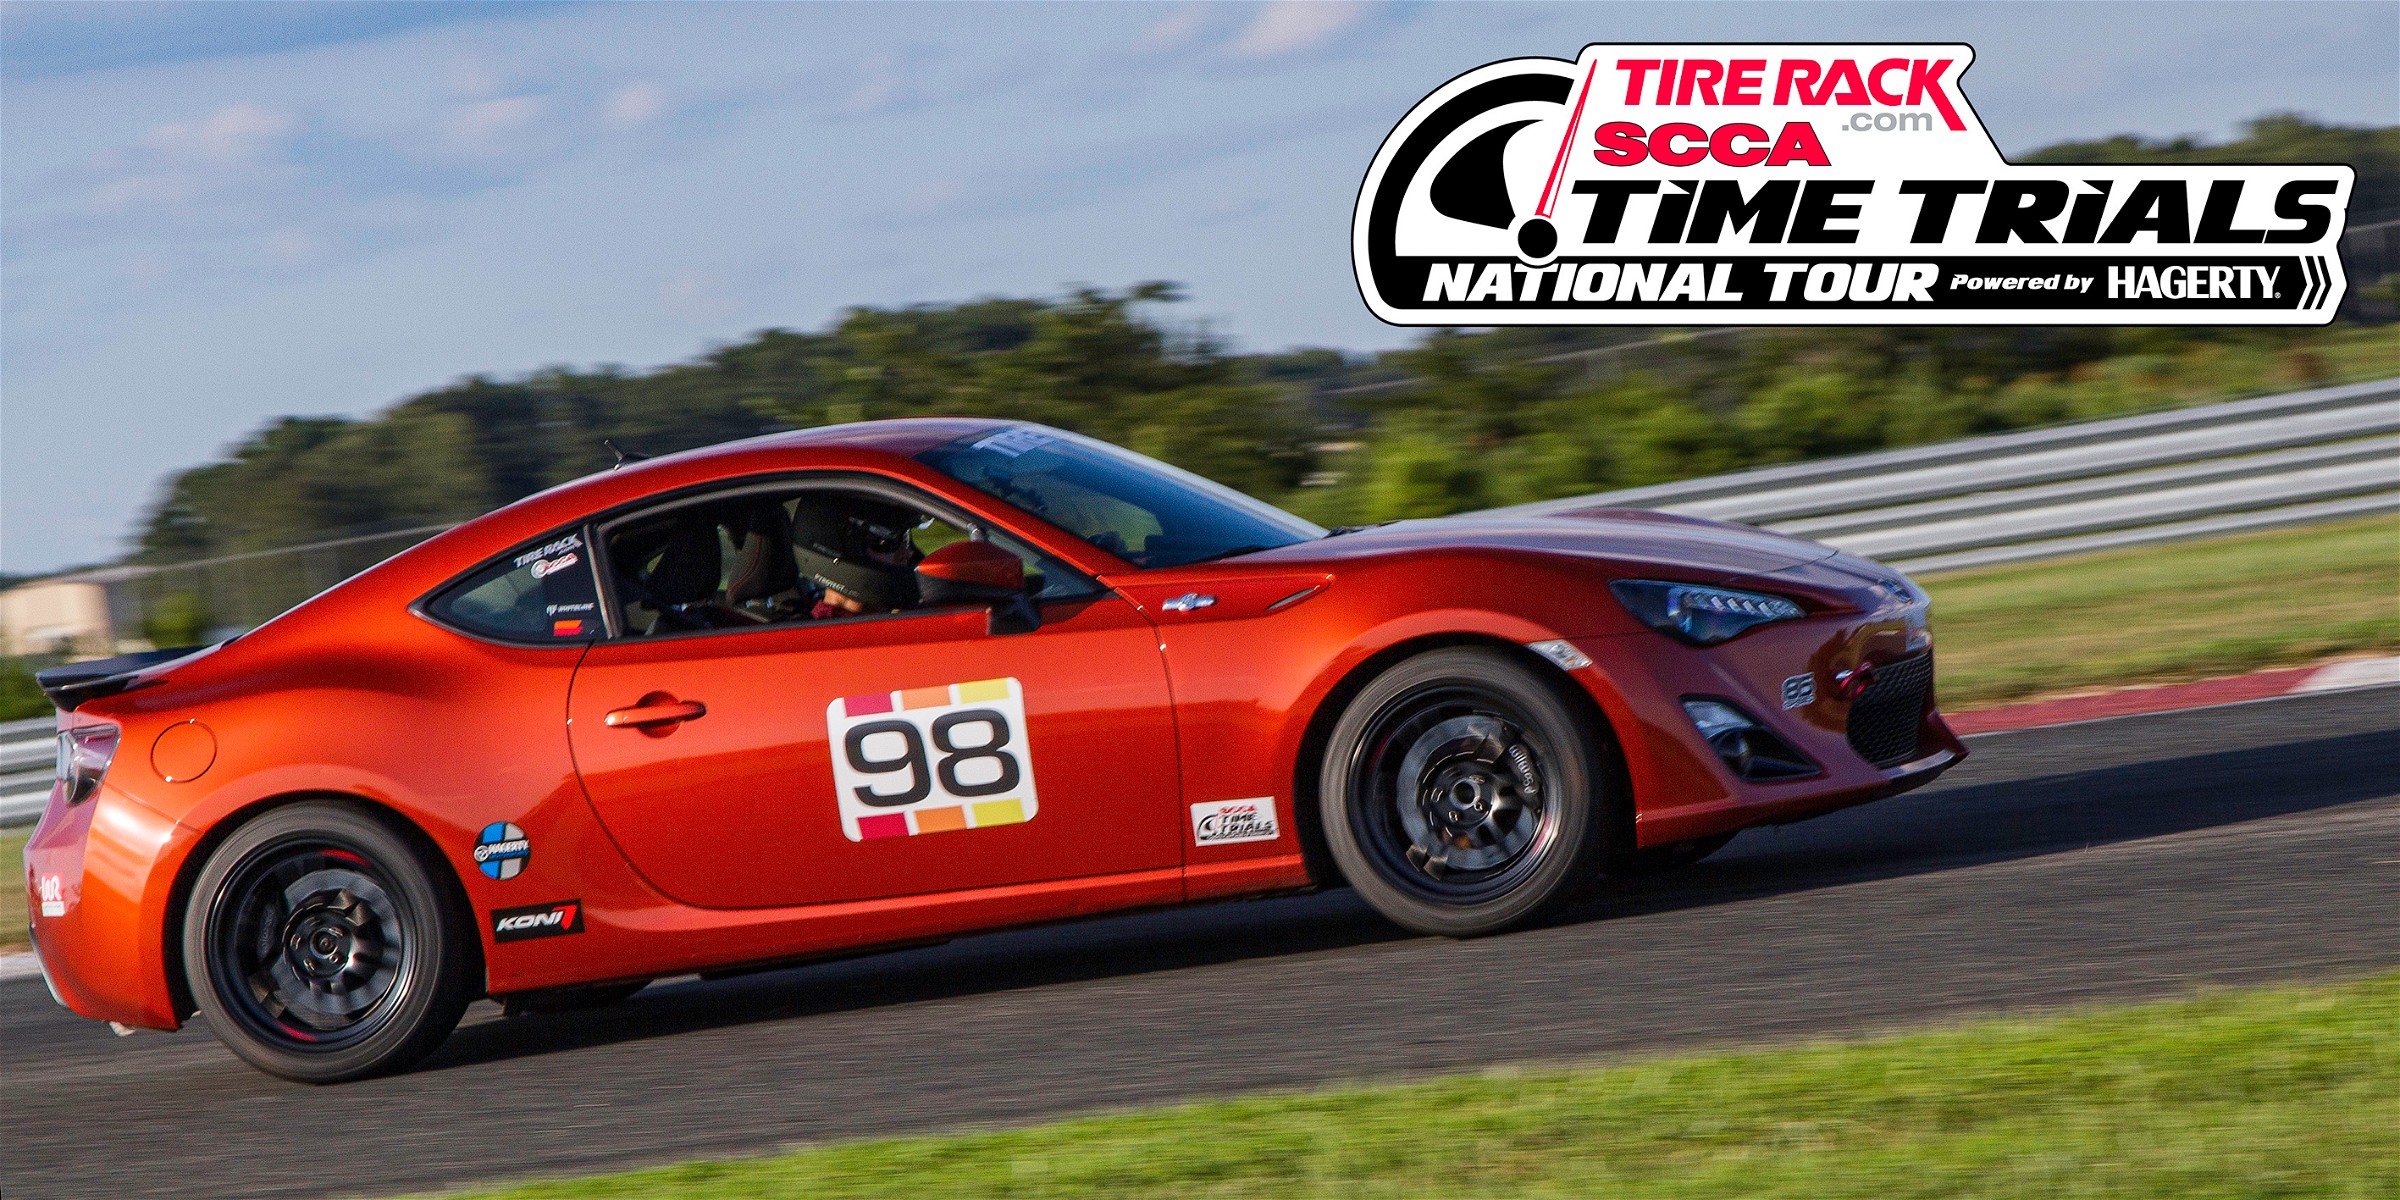 Looking Forward: ’22 NJMP Time Trials National Tour